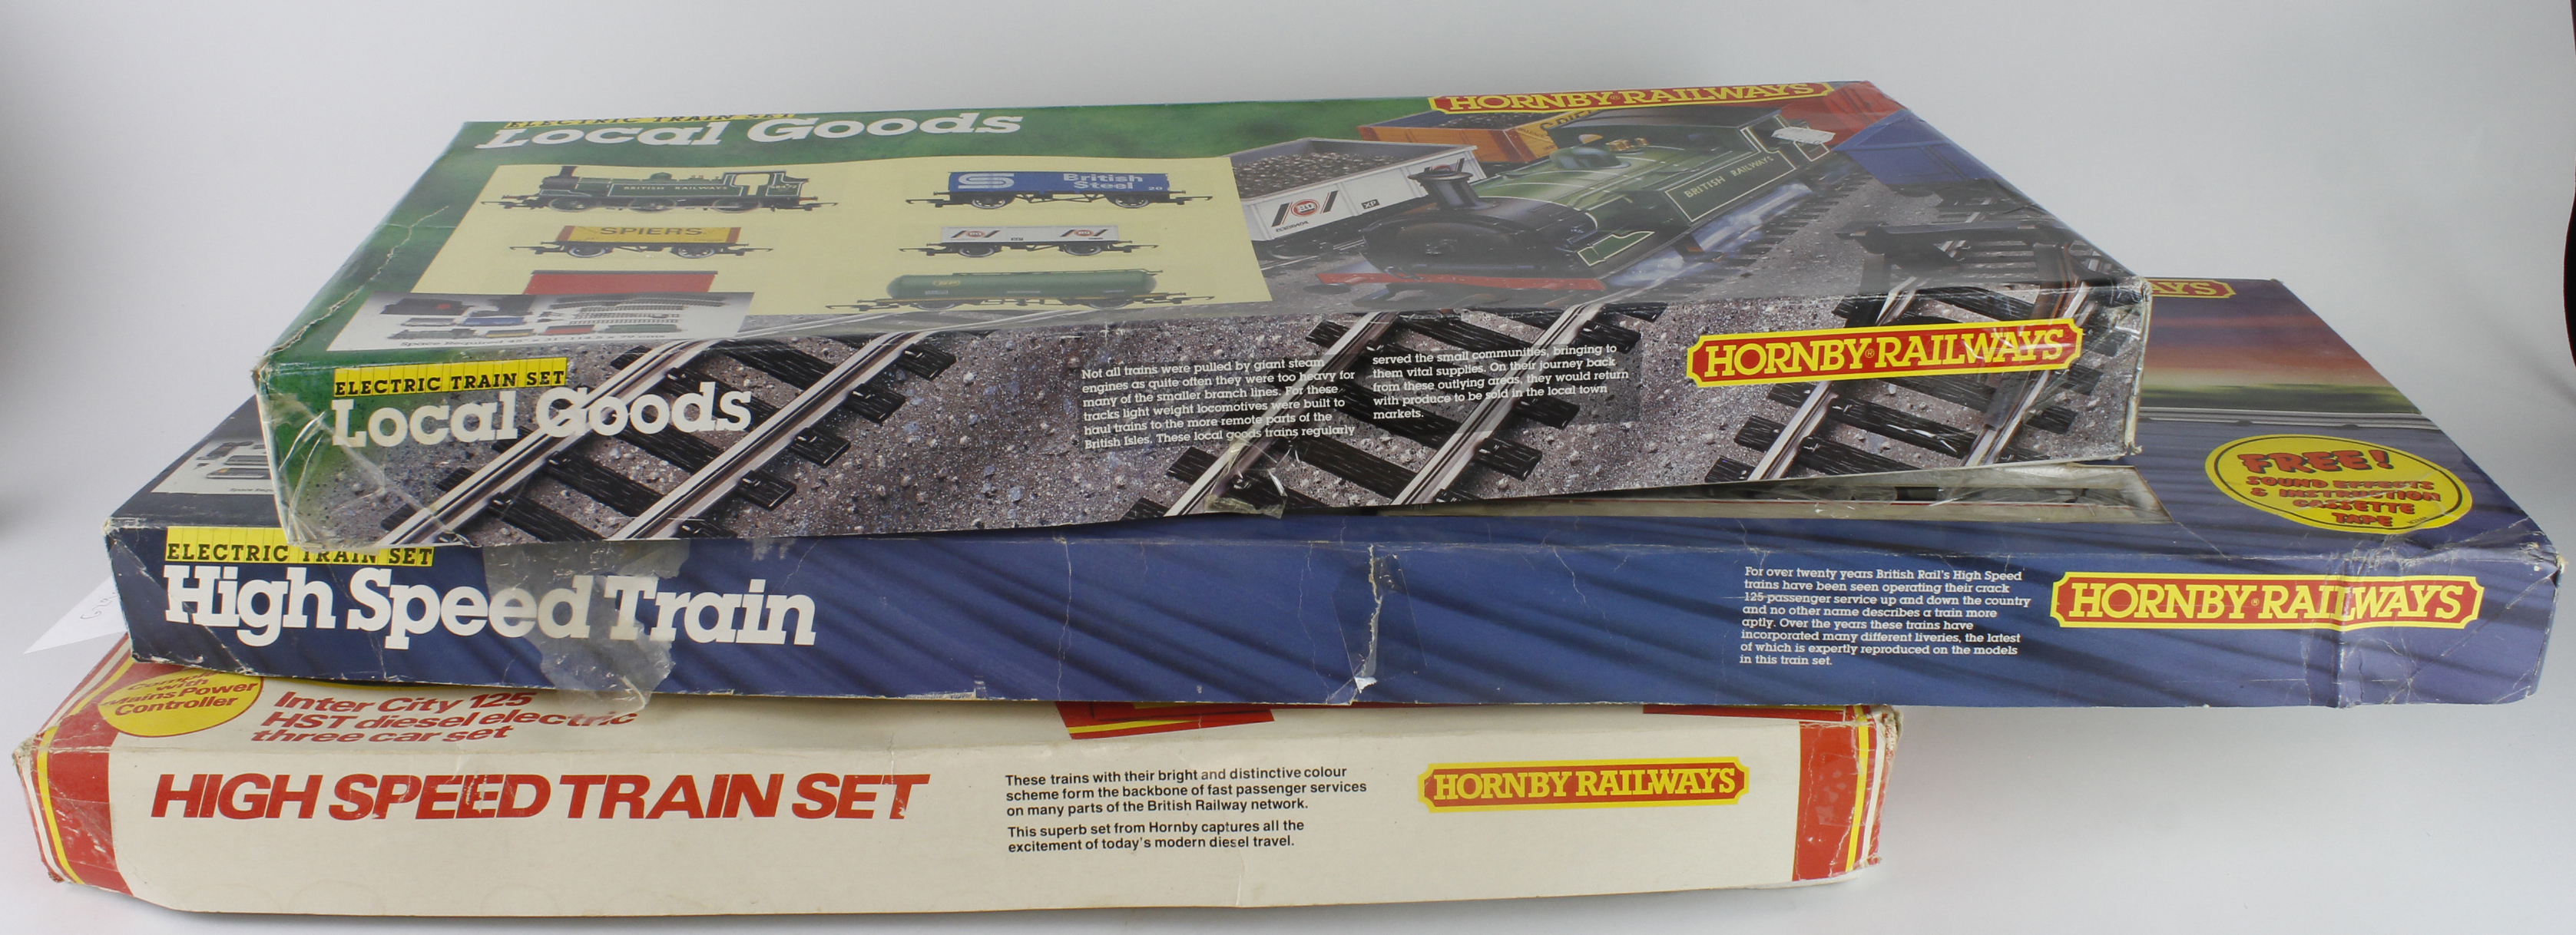 Hornby. Three boxed Hornby OO gauge train sets, comprising two High Speed & one Local Goods set (